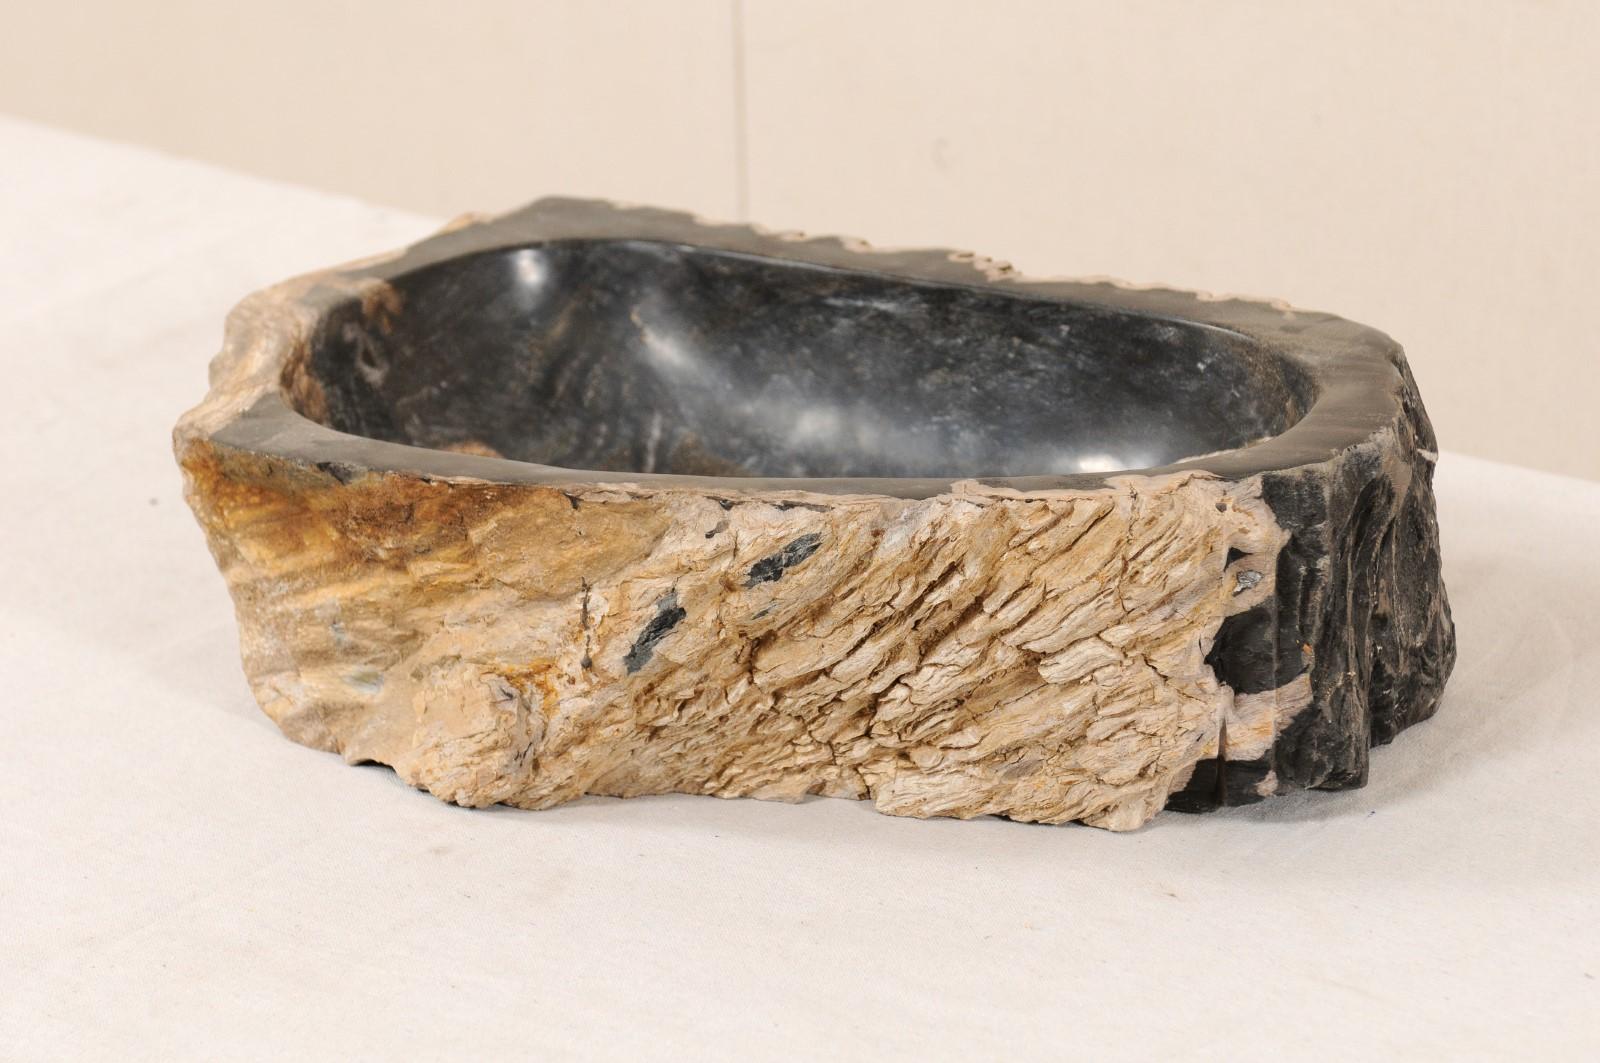 A single petrified wood wash basin. This petrified wood sink has a polished finish basin, making for easy clean-up, surrounded by an unpolished, natural textured exterior. The colors are primarily black with brown veining within the basin, and